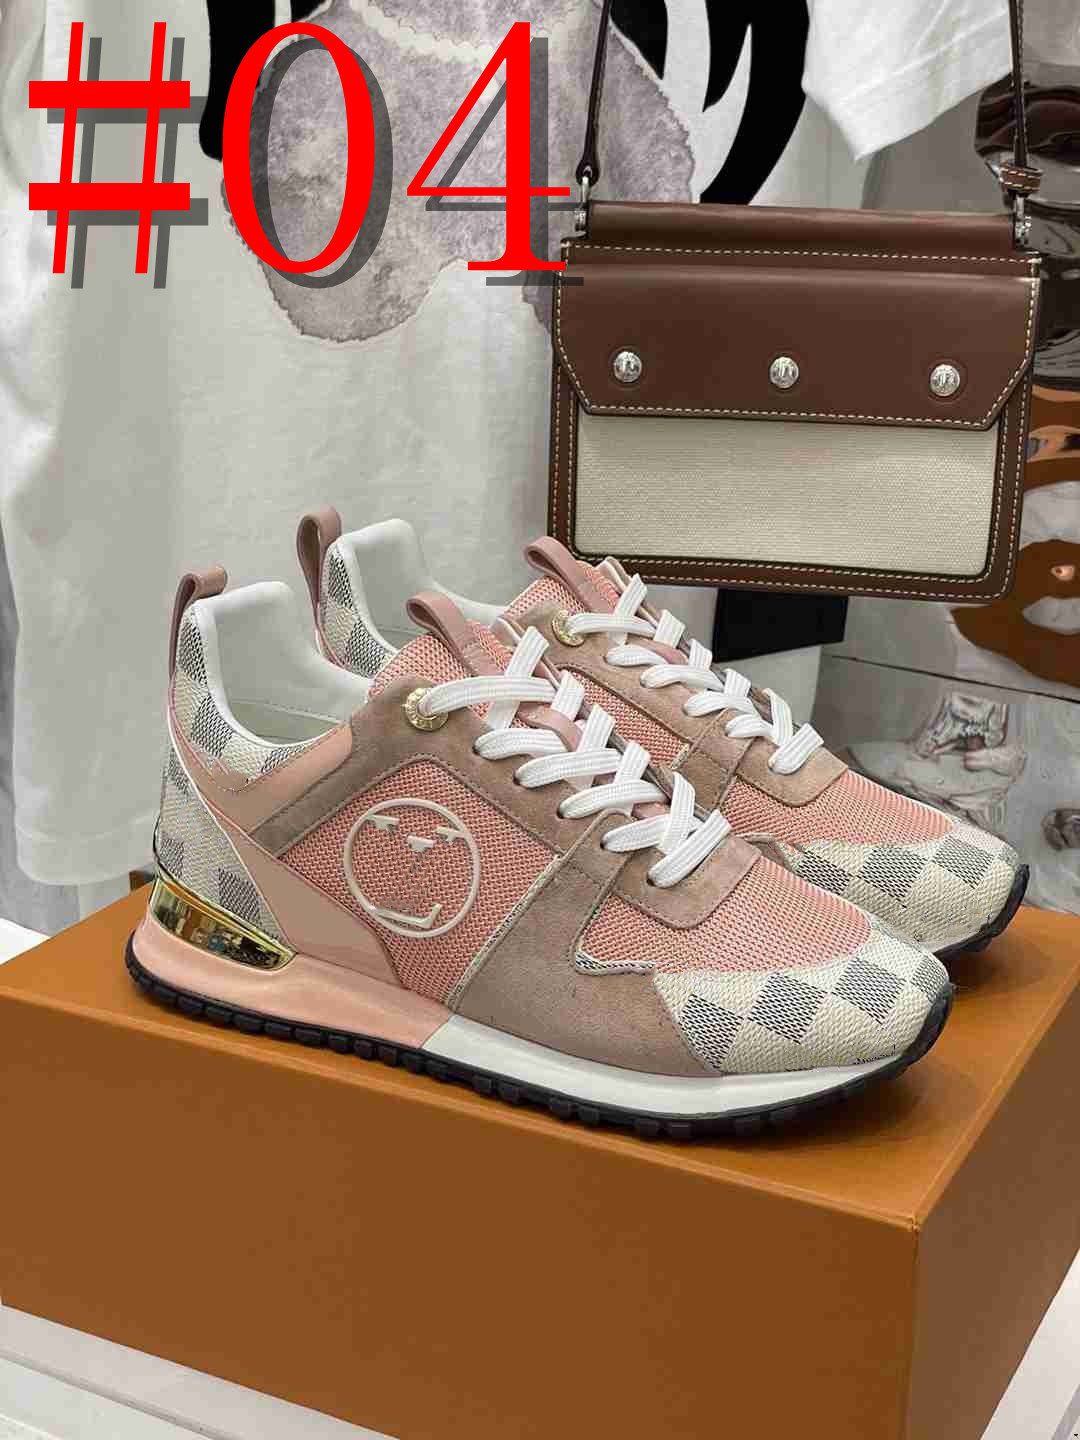 42 Model Luxury Mens Women Casual Shoes Bouncing Sneaker White Calfskin Leather and Summer Walk Sneakers Low Top Lace Up Gummi Sules Light Trainers With Box 35-45